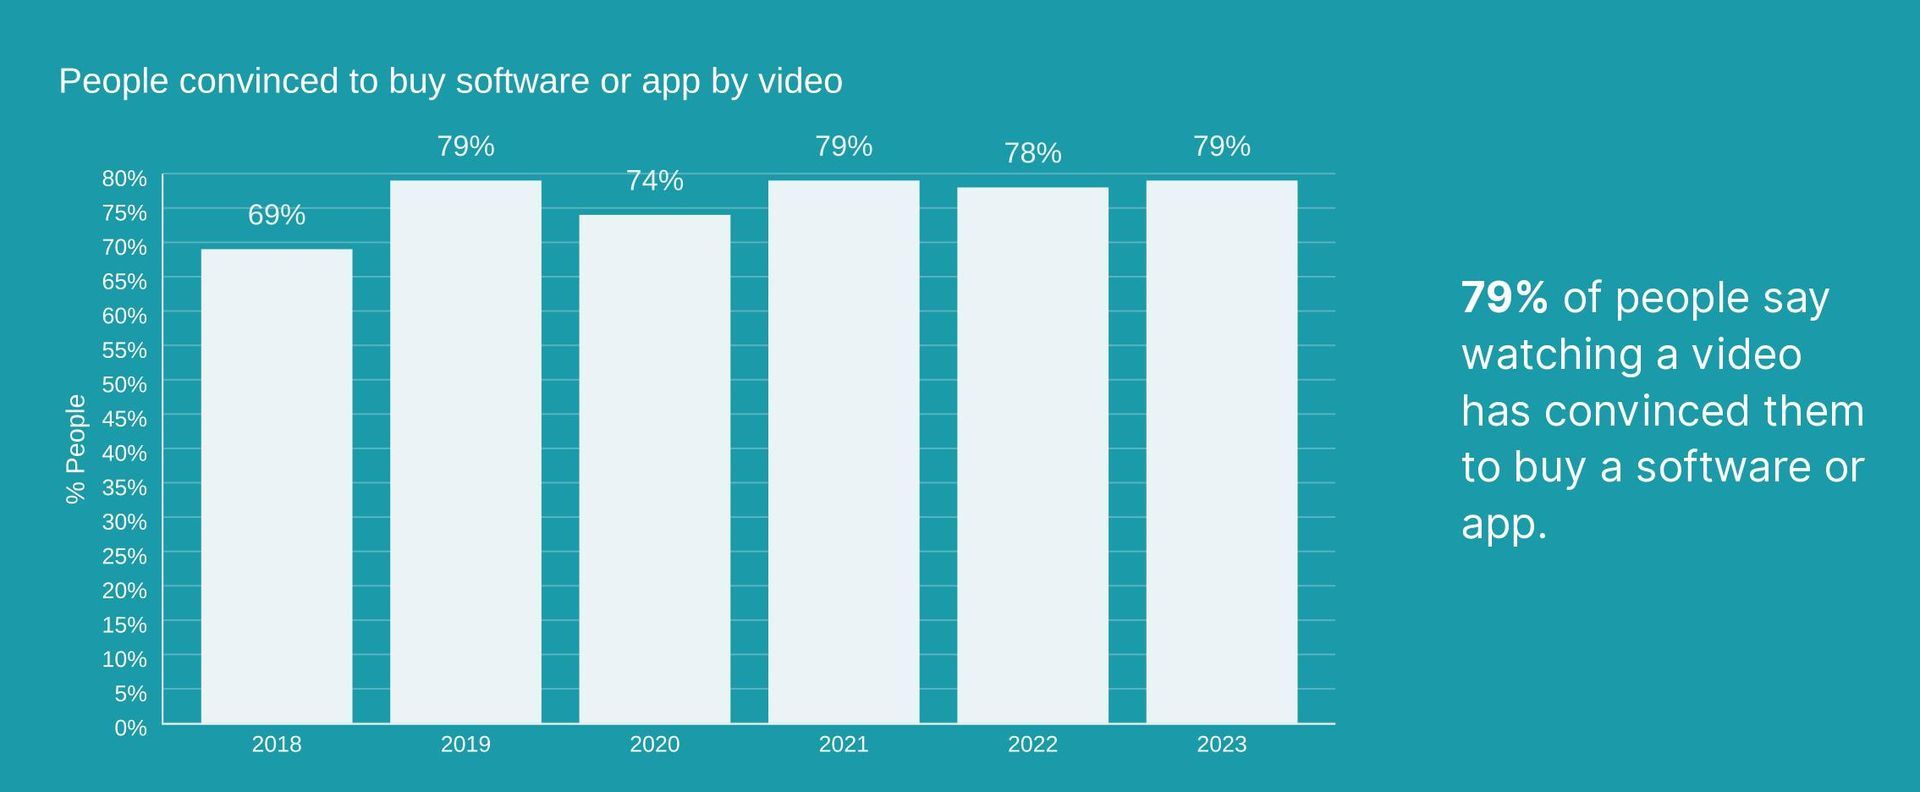 Graph showing percentage of people convinced by a video to buy software or an app, from 2018 to 2023